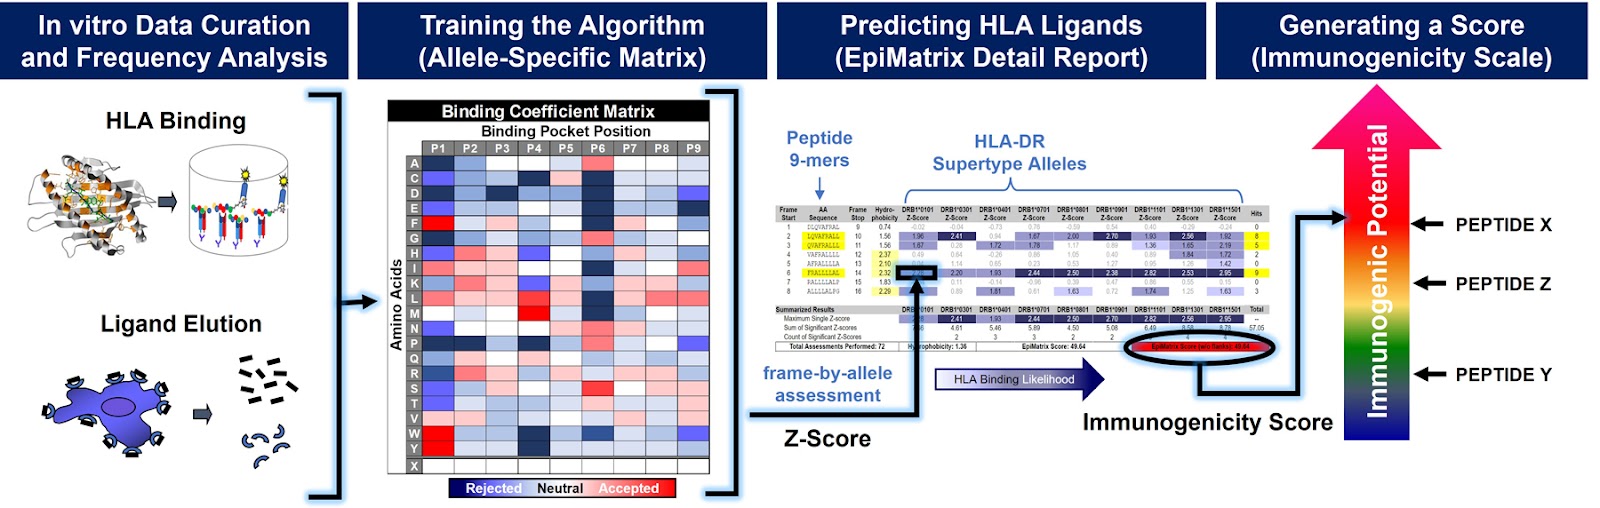 graphic showing in vitro data curation and frequency analysis leading to training the algorithm with a heat map leading to predicting HLA ligands with an EpiMatrix Detail Report leading to generating an immunogenicity score.